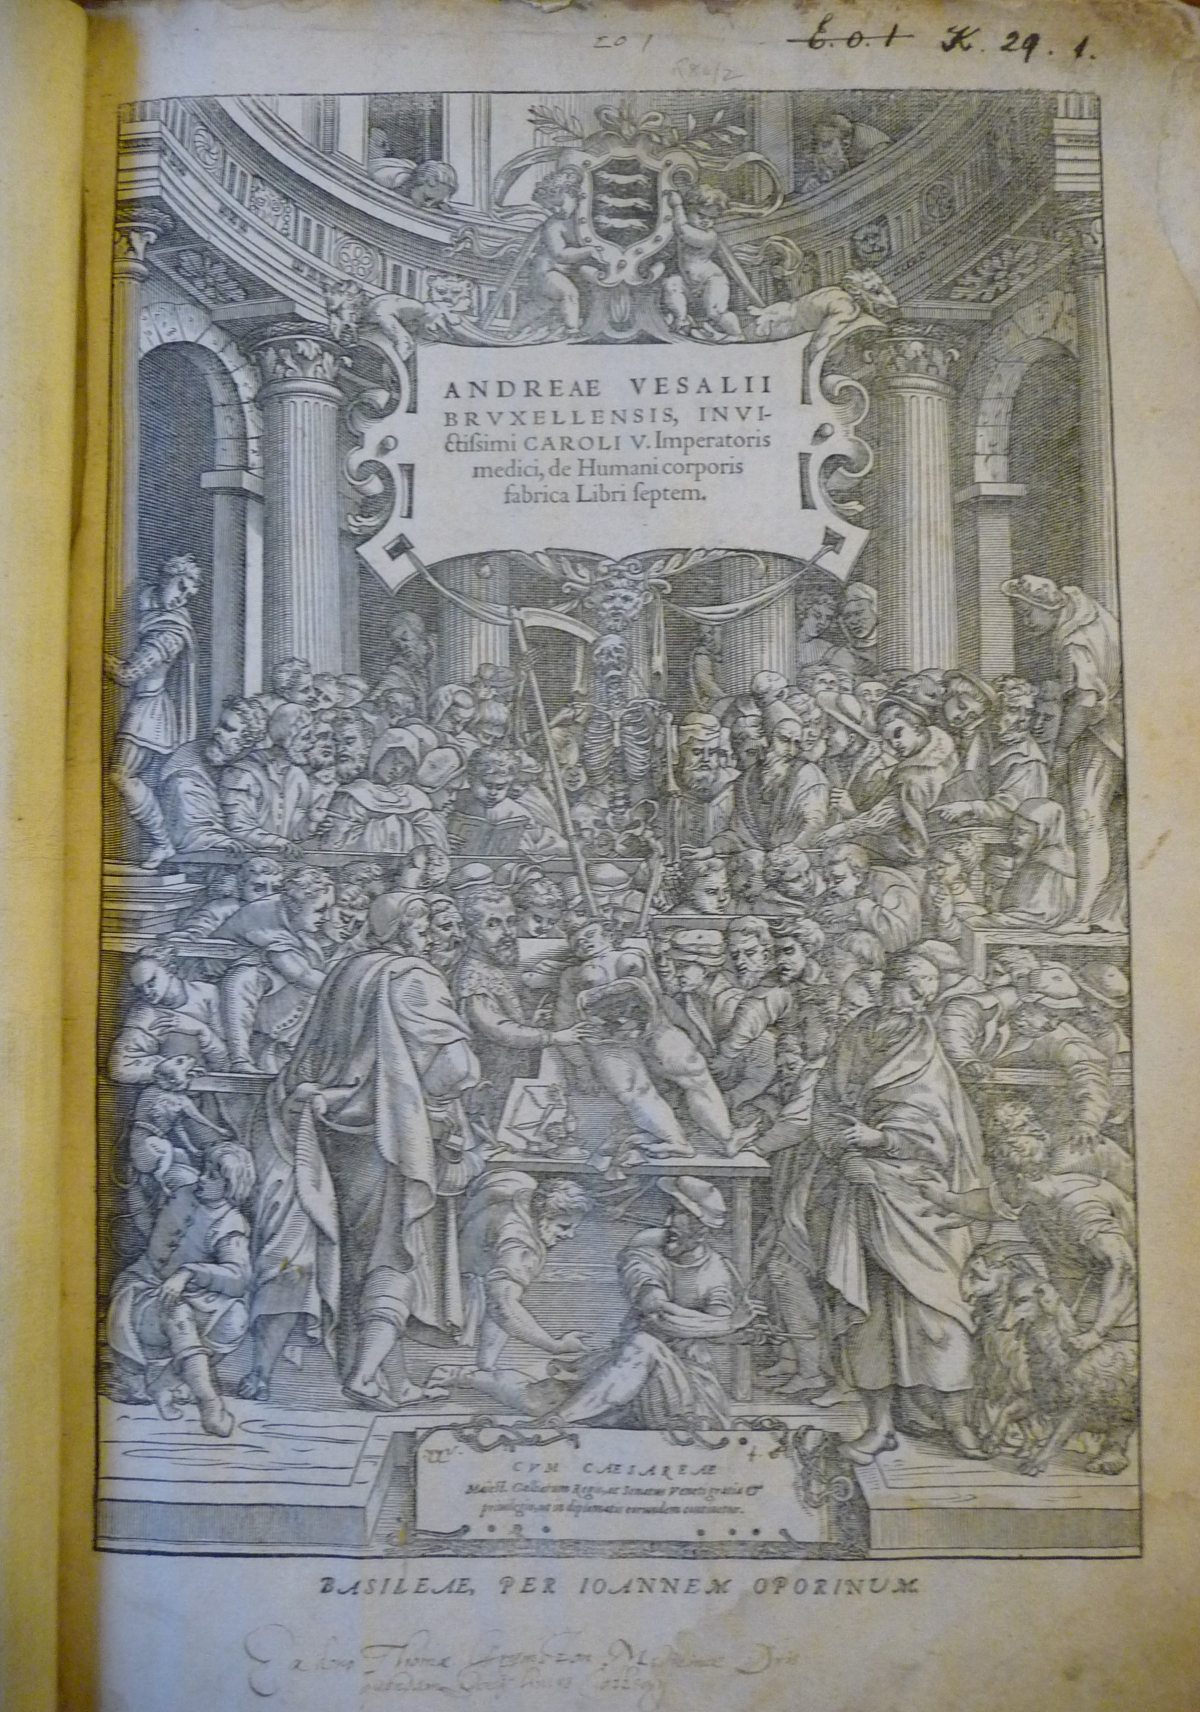 Title page from 'De humani corporis fabrica' (The fabric of the human body) by Andreas Vesalius.